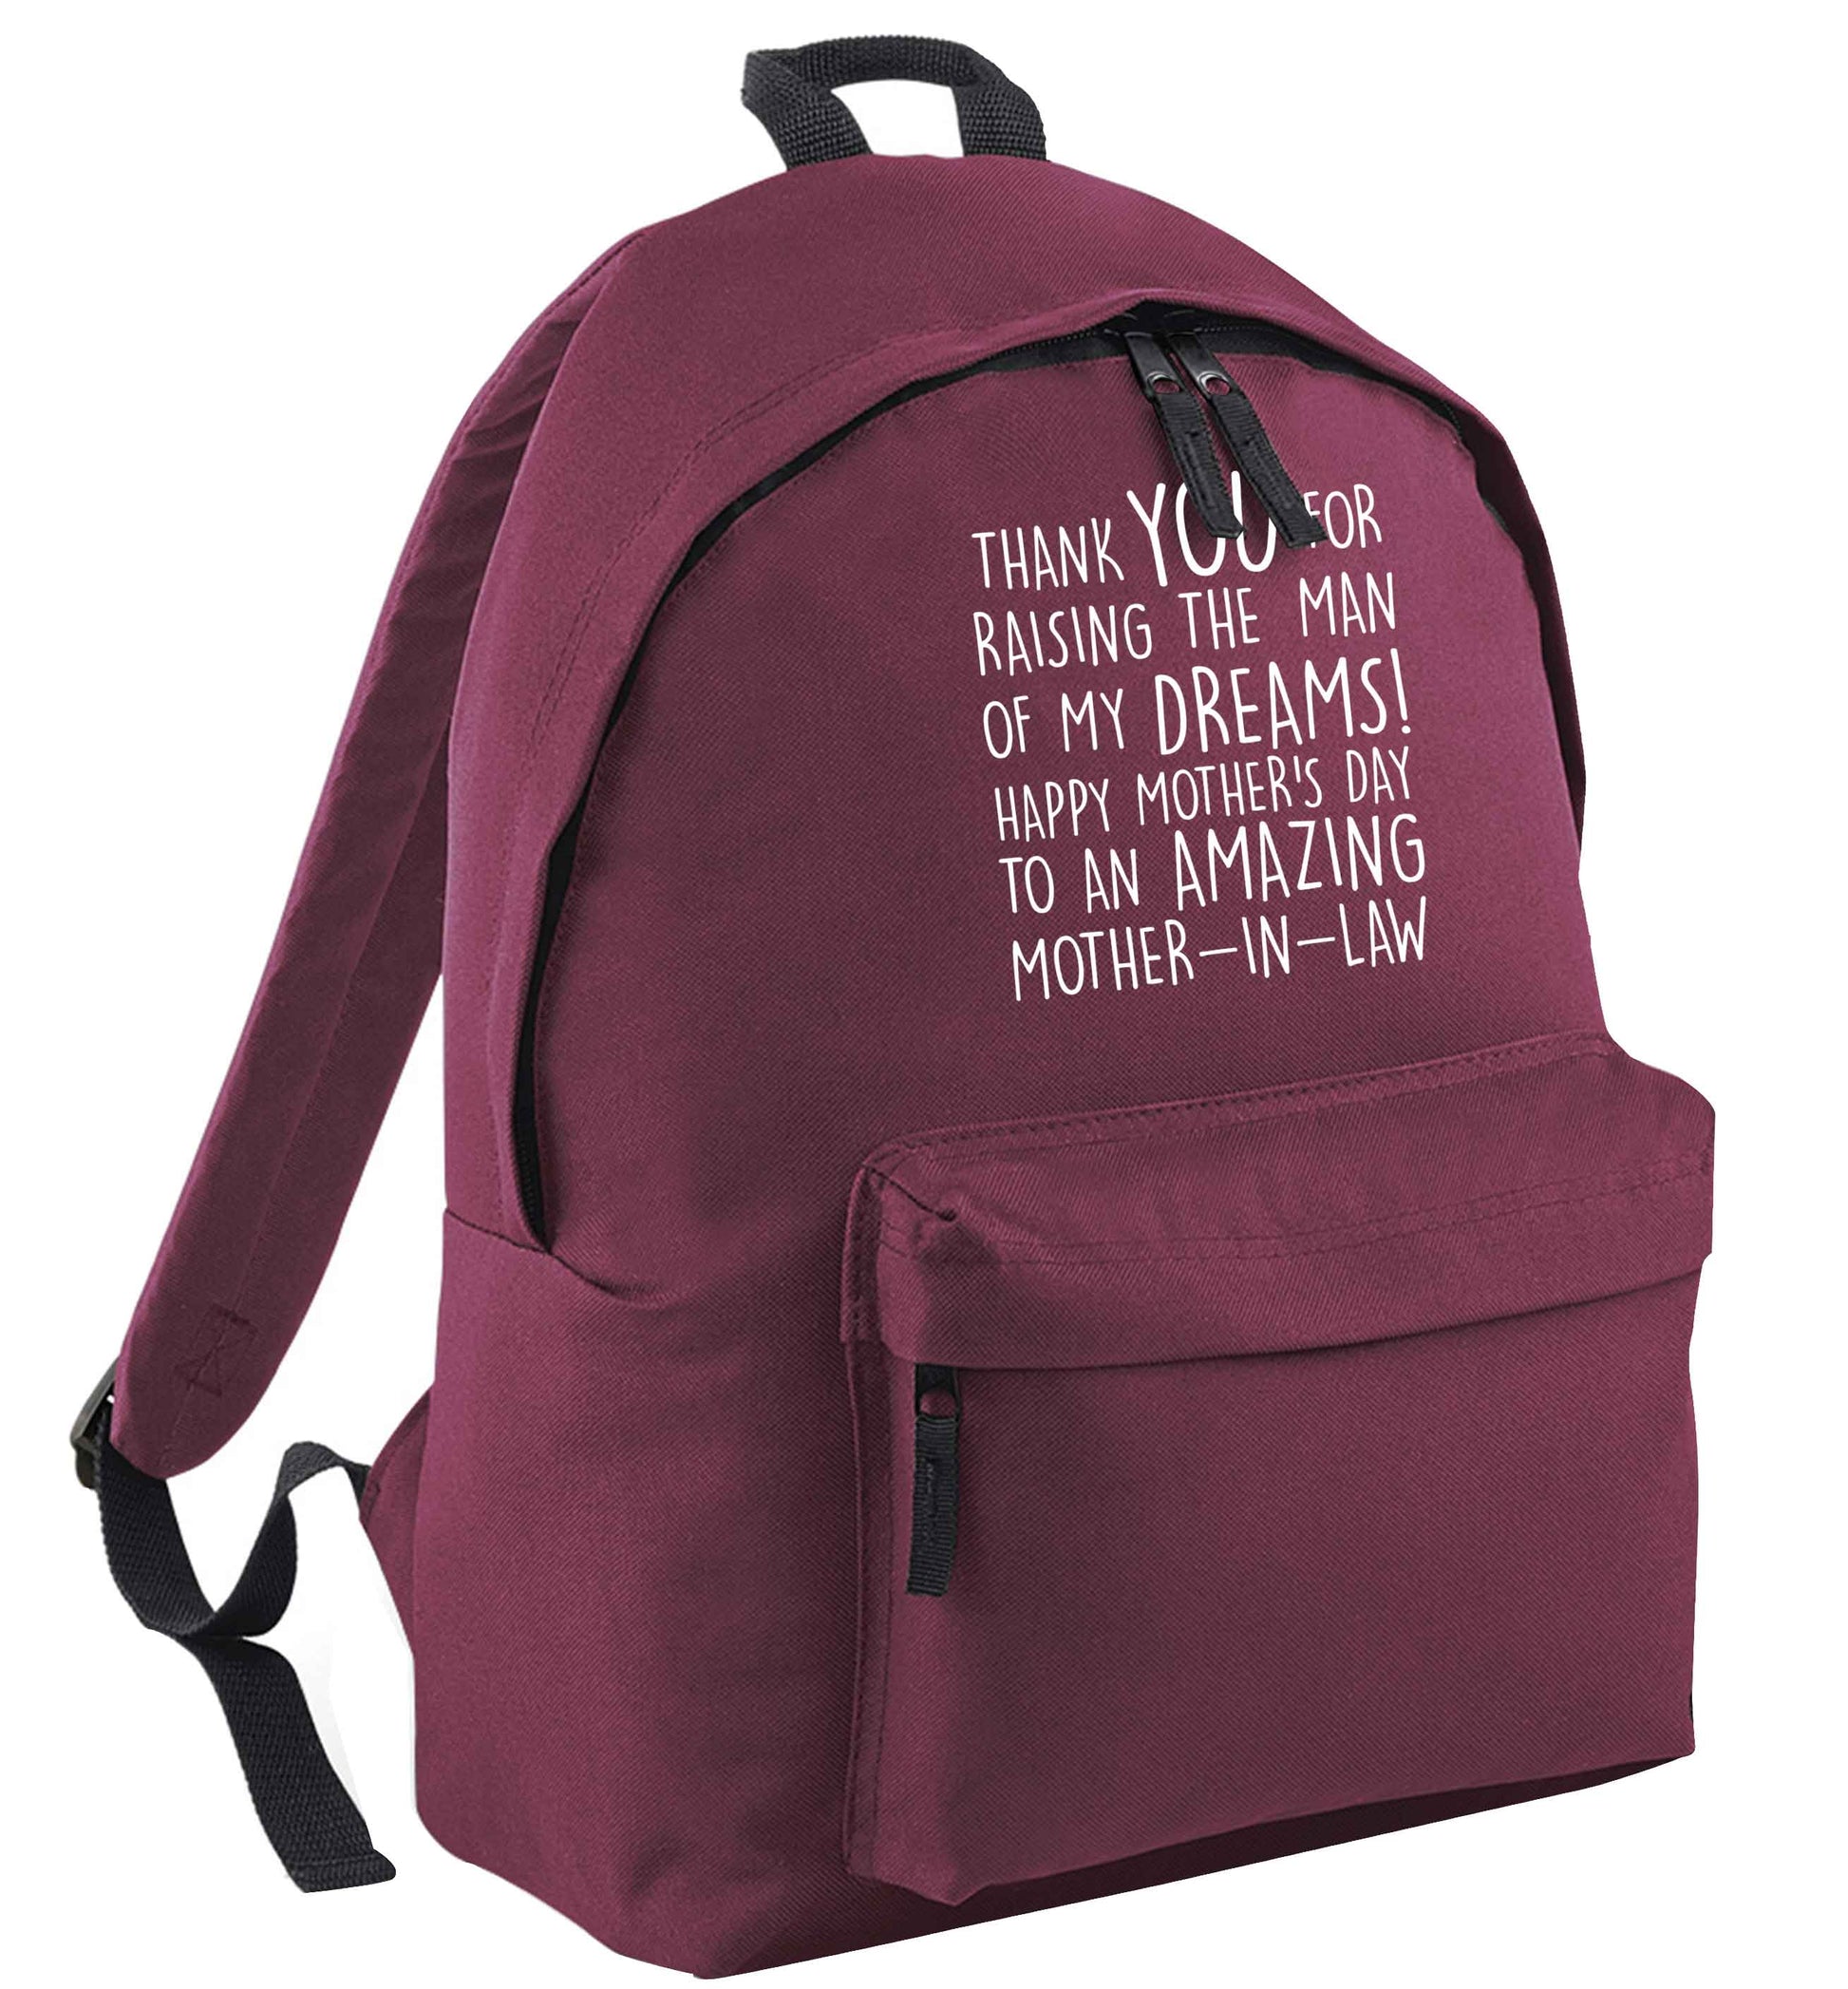 Raising the man of my dreams mother's day mother-in-law black childrens backpack